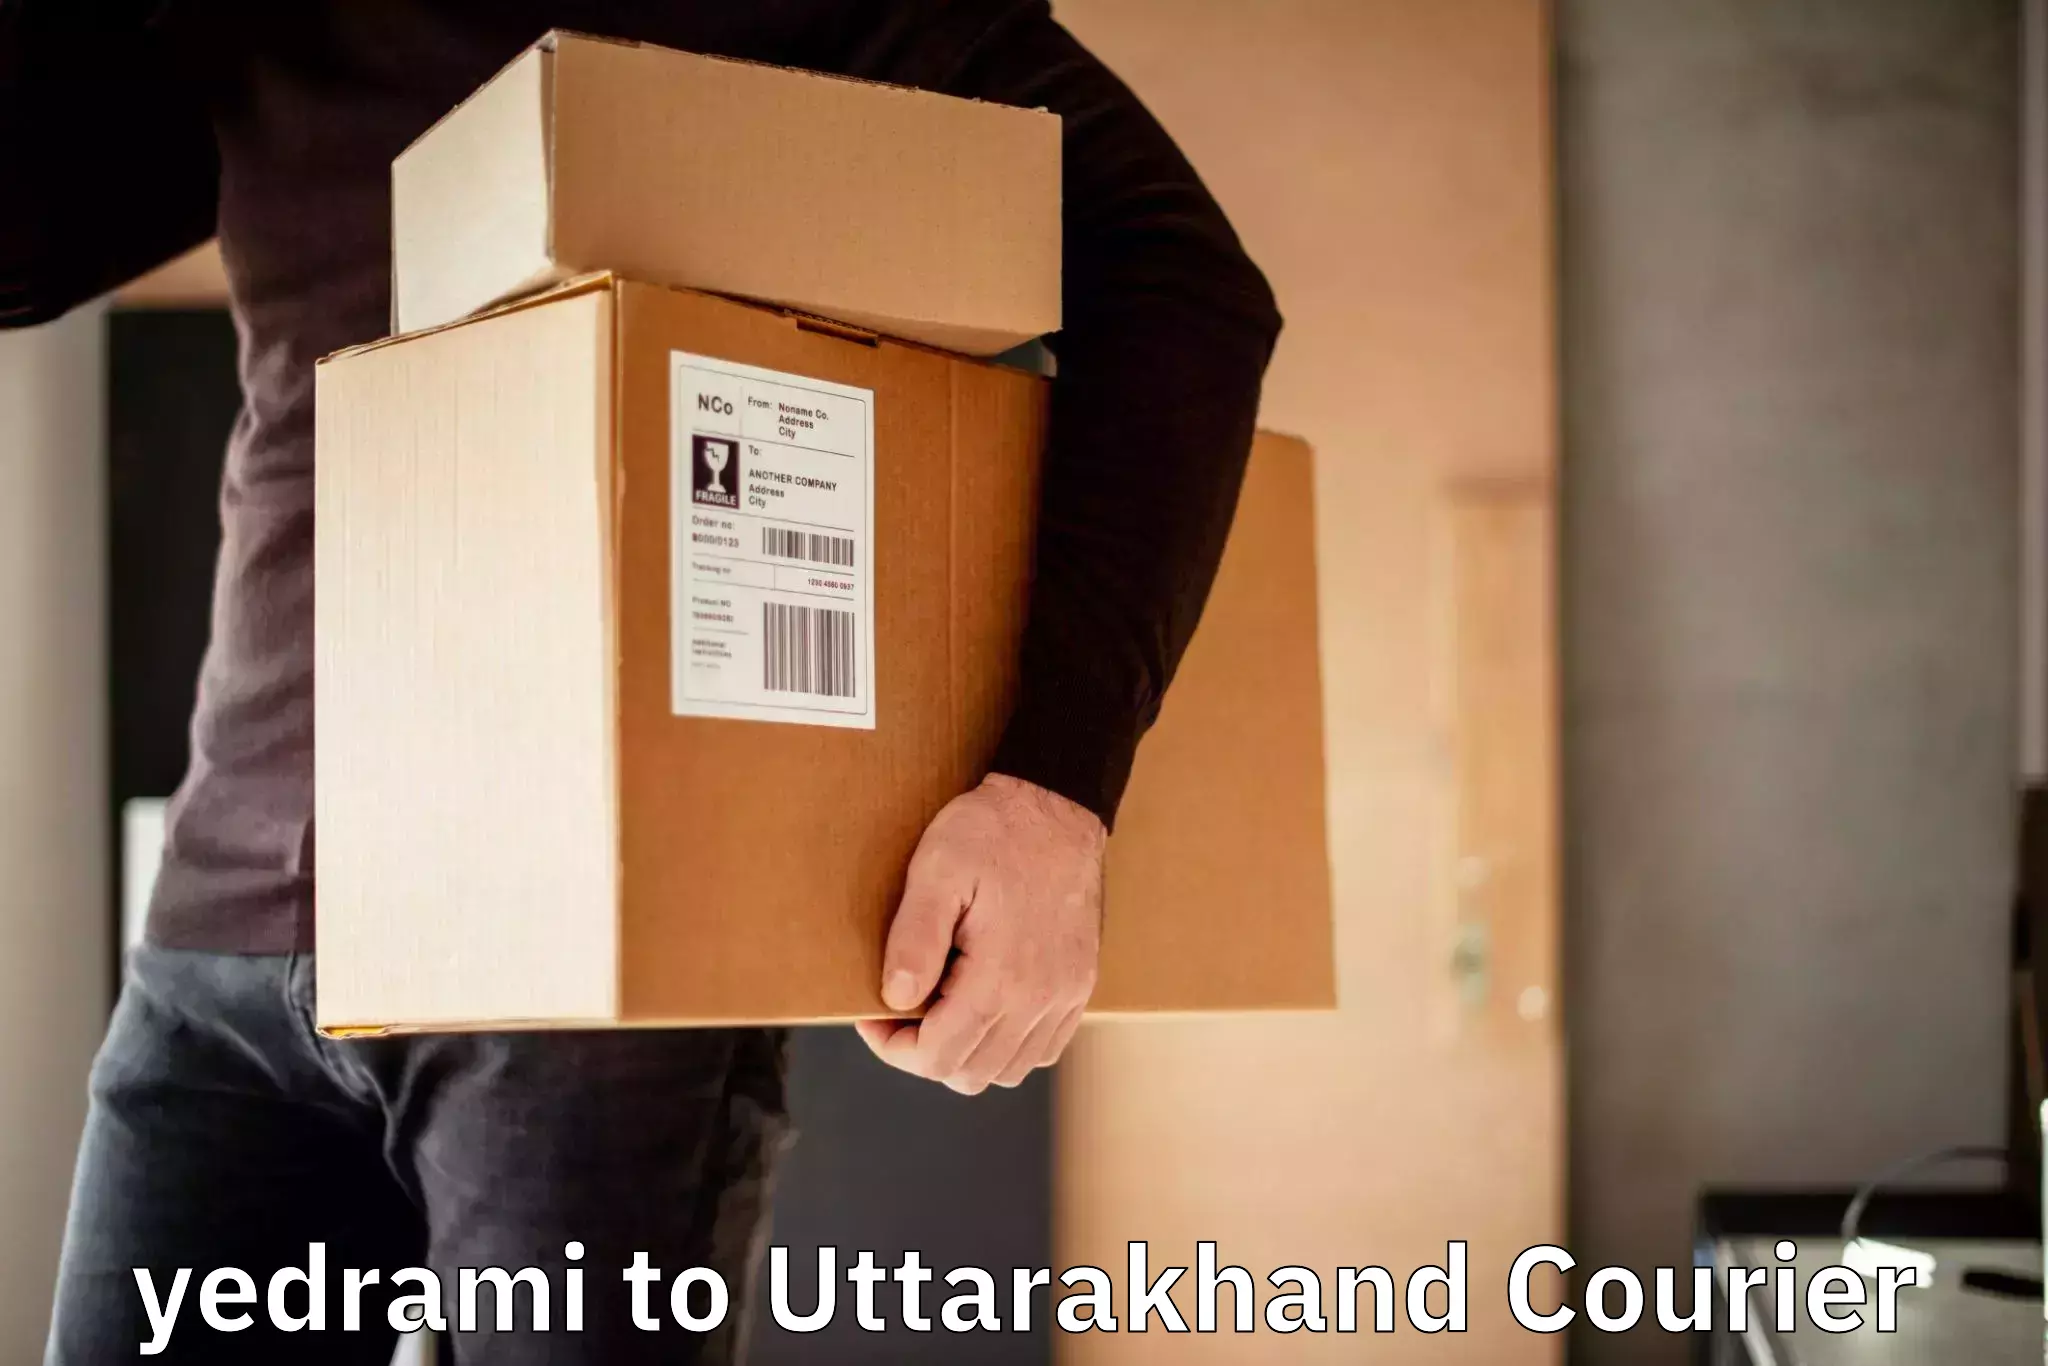 Automated parcel services yedrami to Gopeshwar